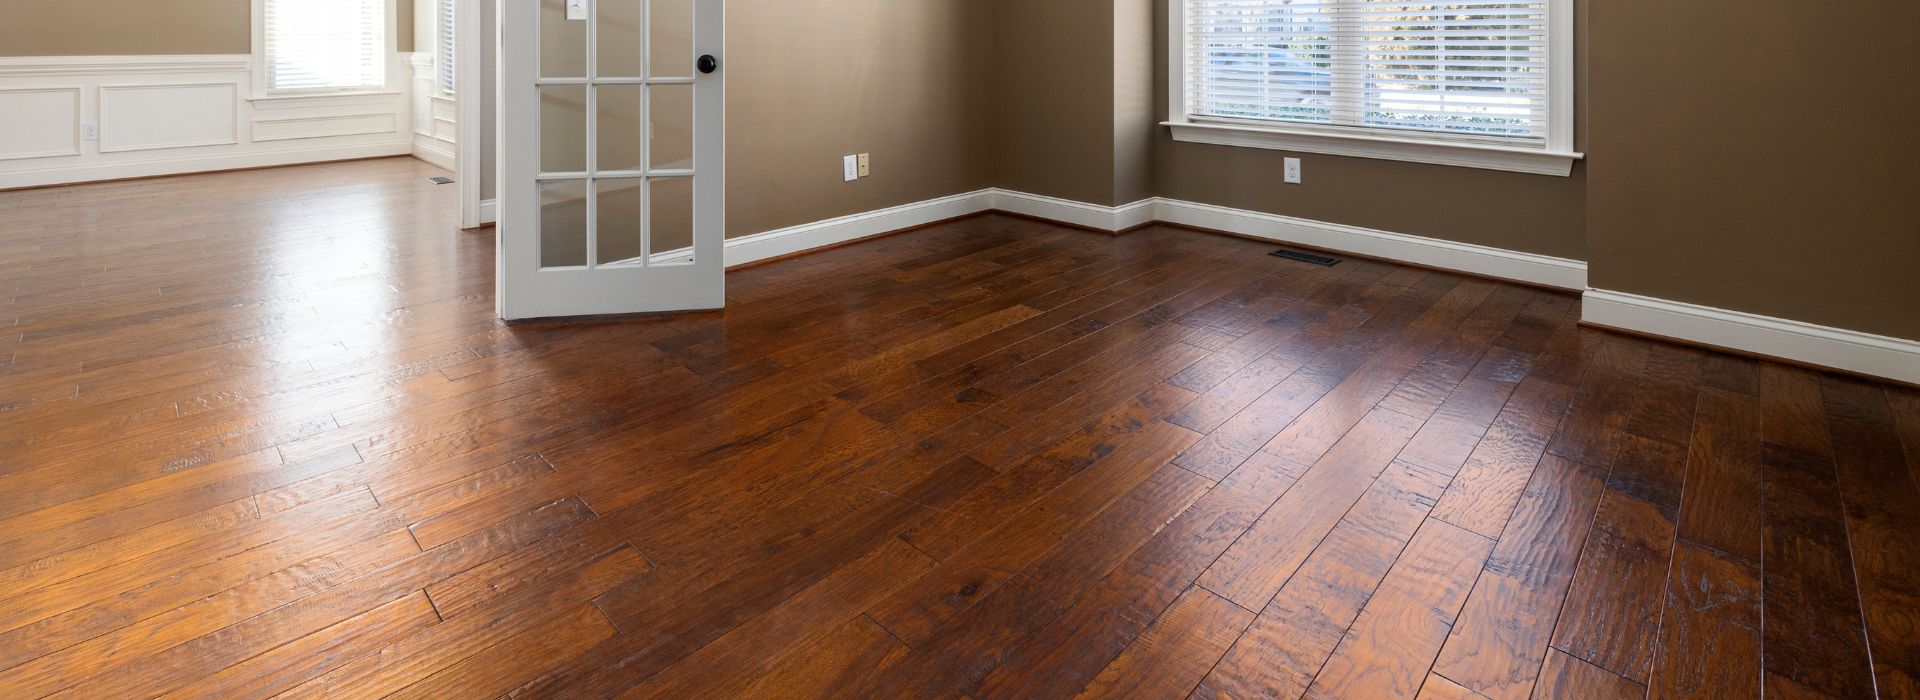 How to Remove Linoleum Flooring: A Step-by-Step Guide